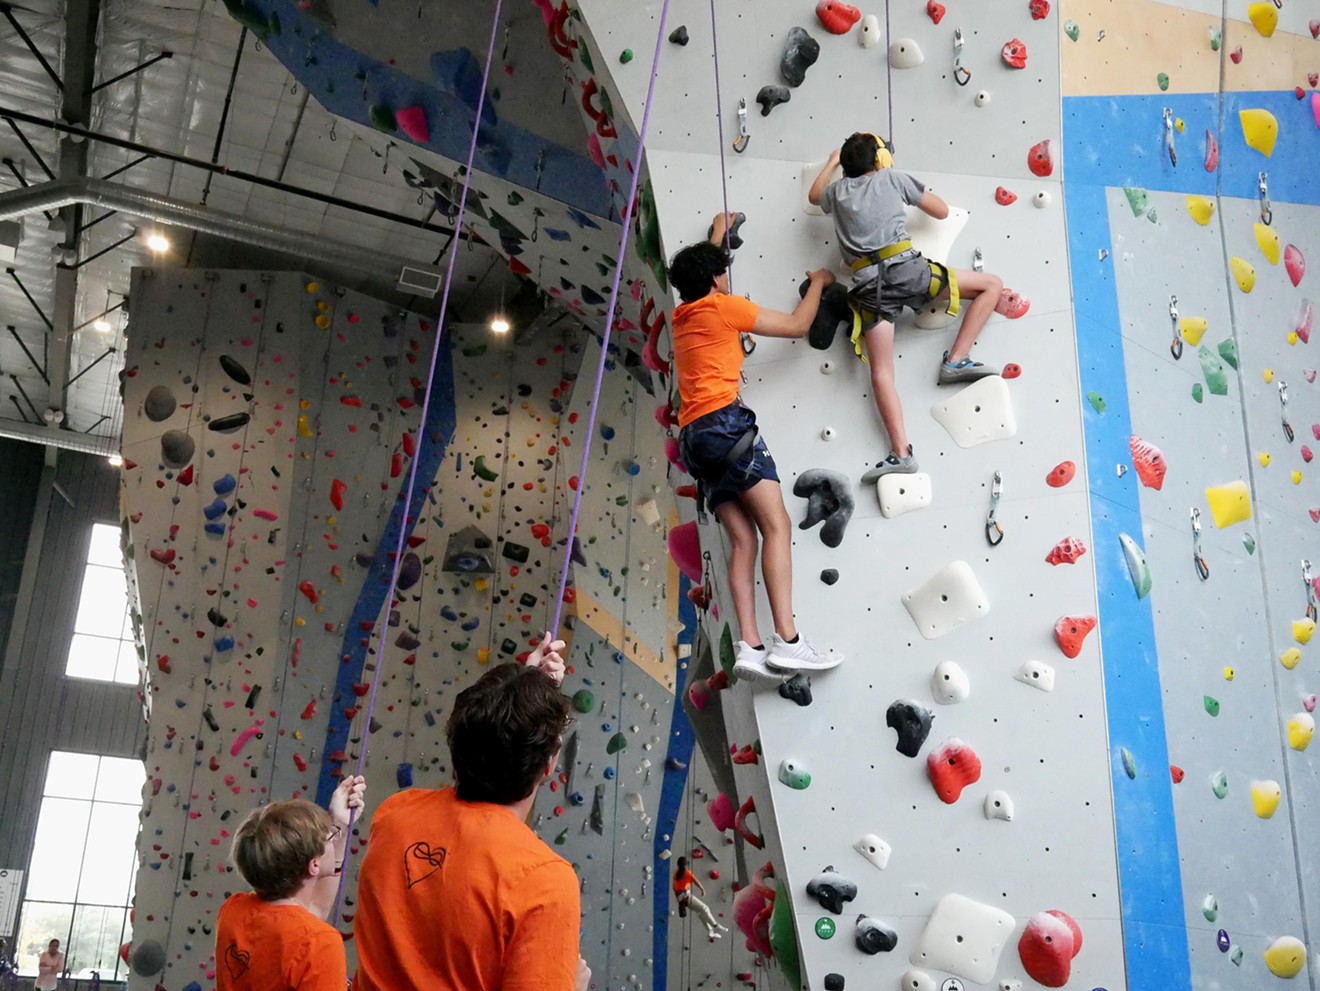 Jacob Shaffstall, 10, climbs the white route with volunteers' help at Movement Gym in Grapevine.